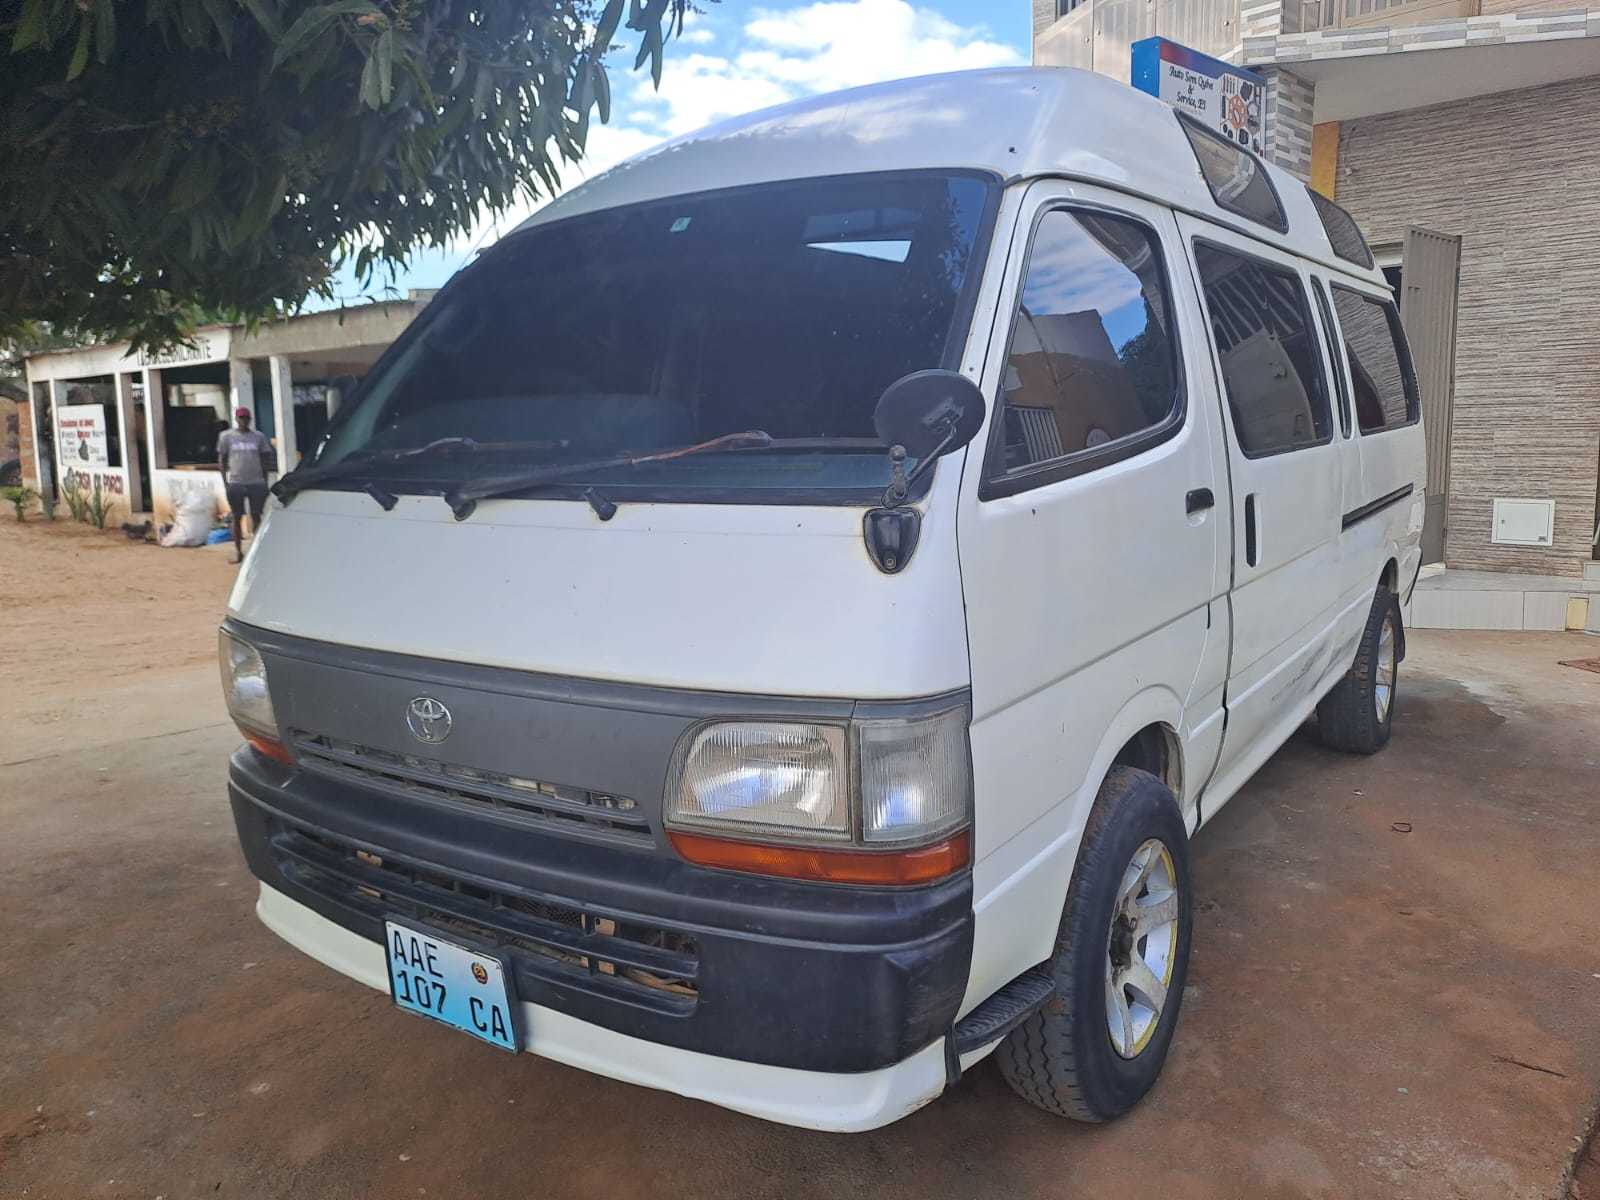 Toyota hiace For Sale in Mozambique at Best Prices | UsedCars.co.mz